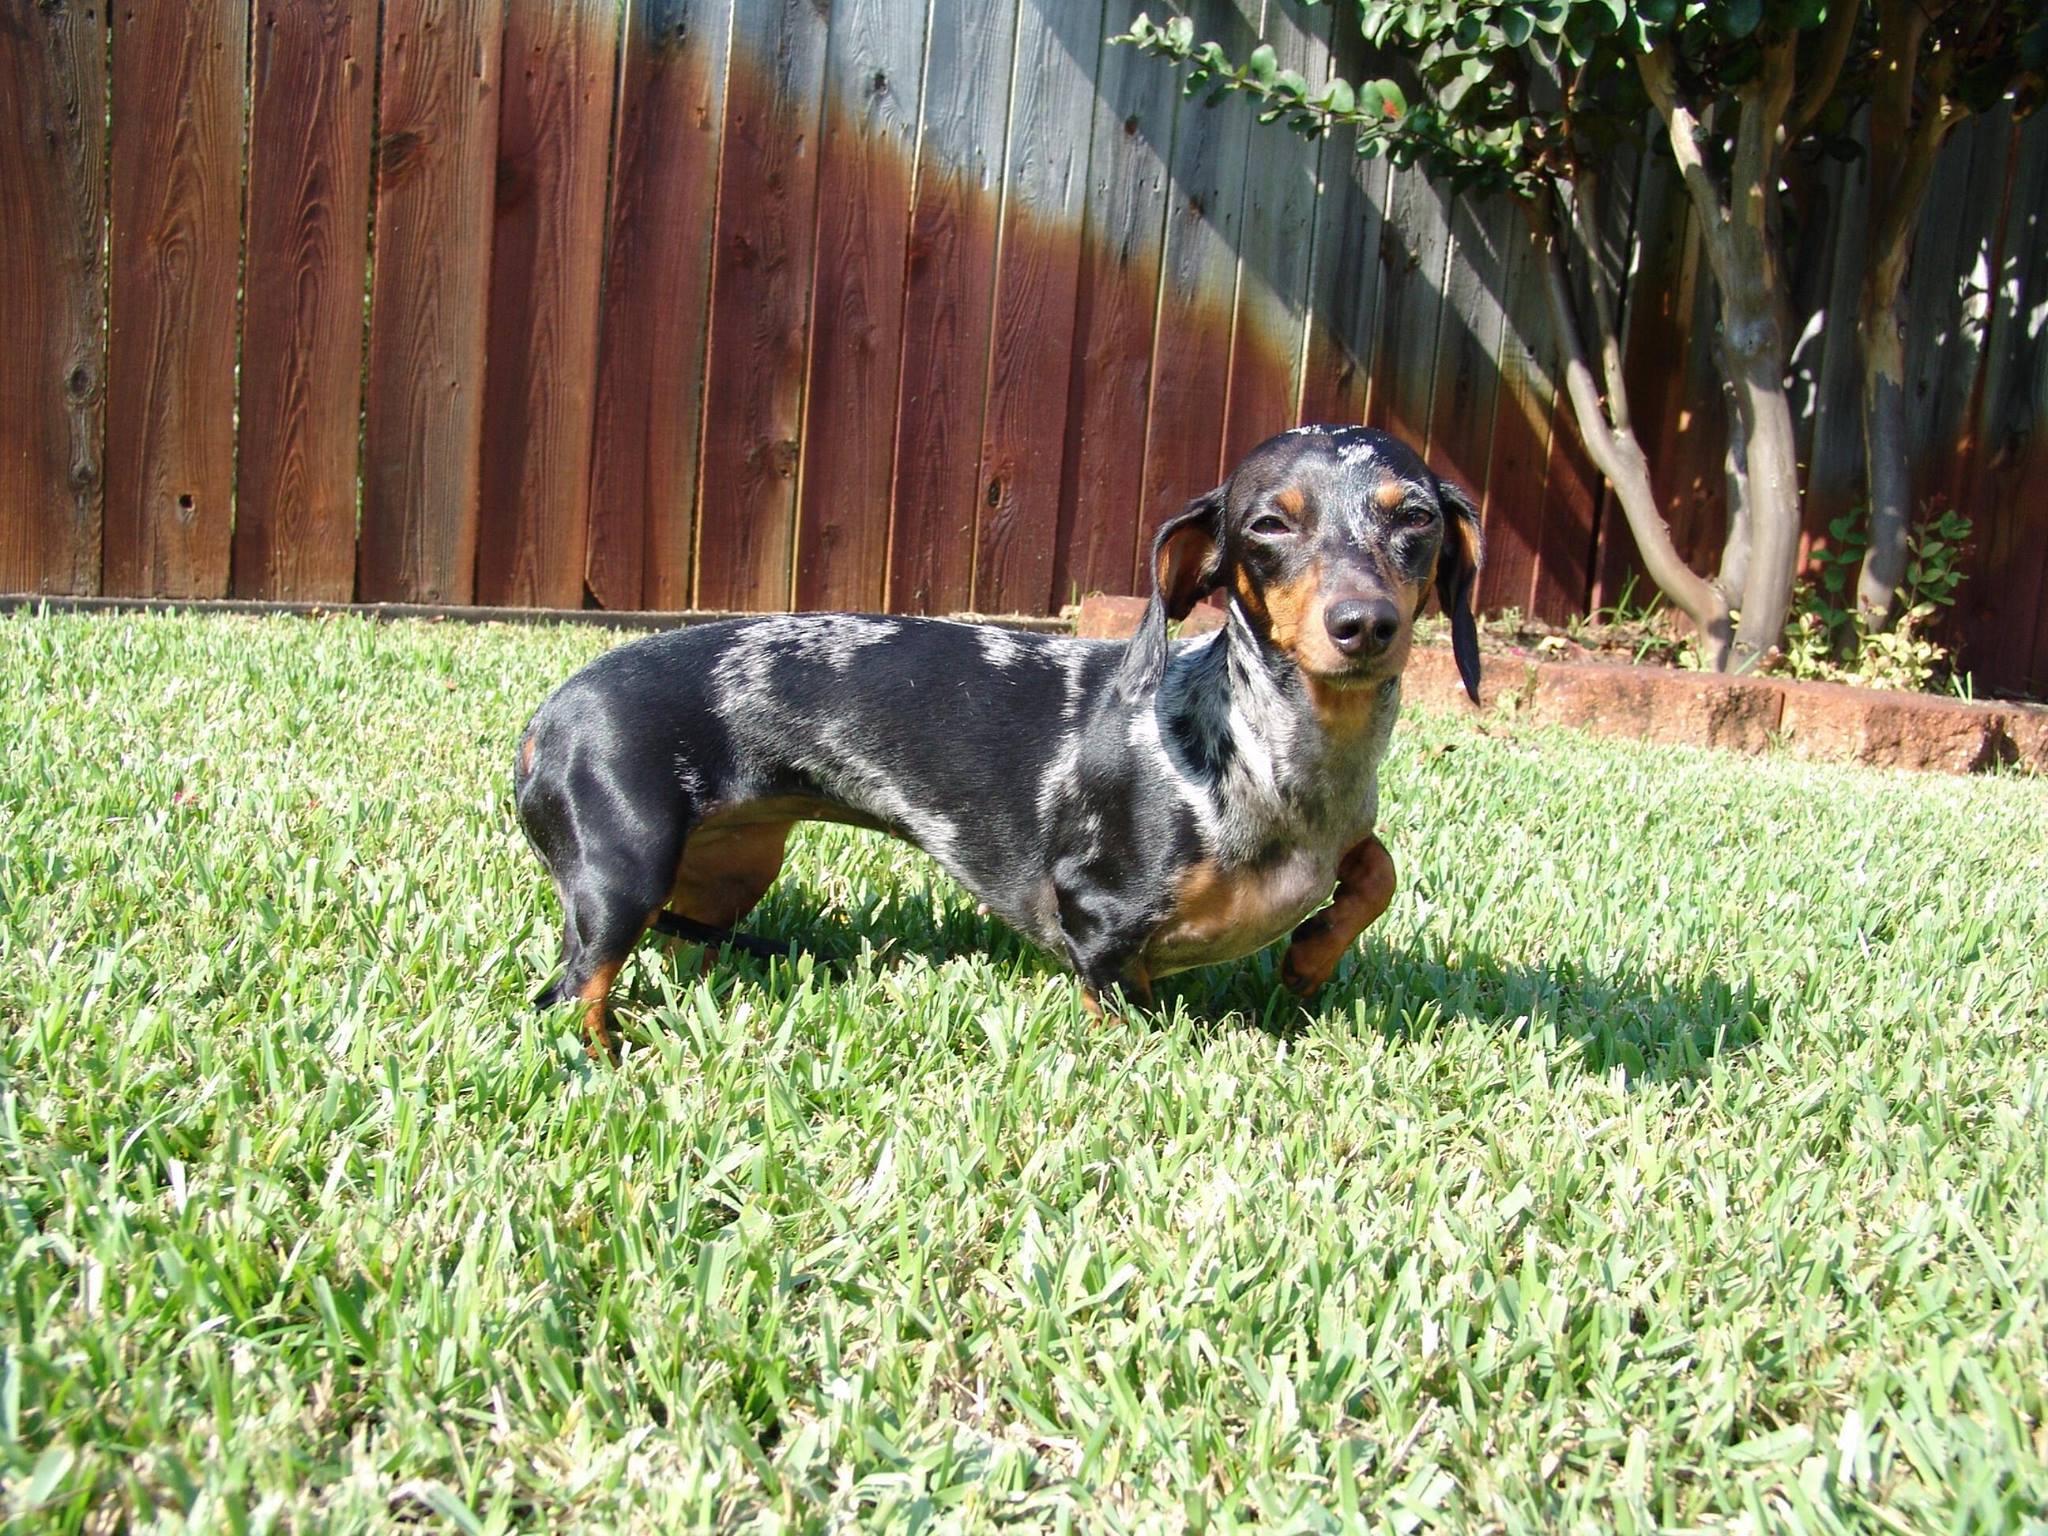 A Dachshund standing in the yard